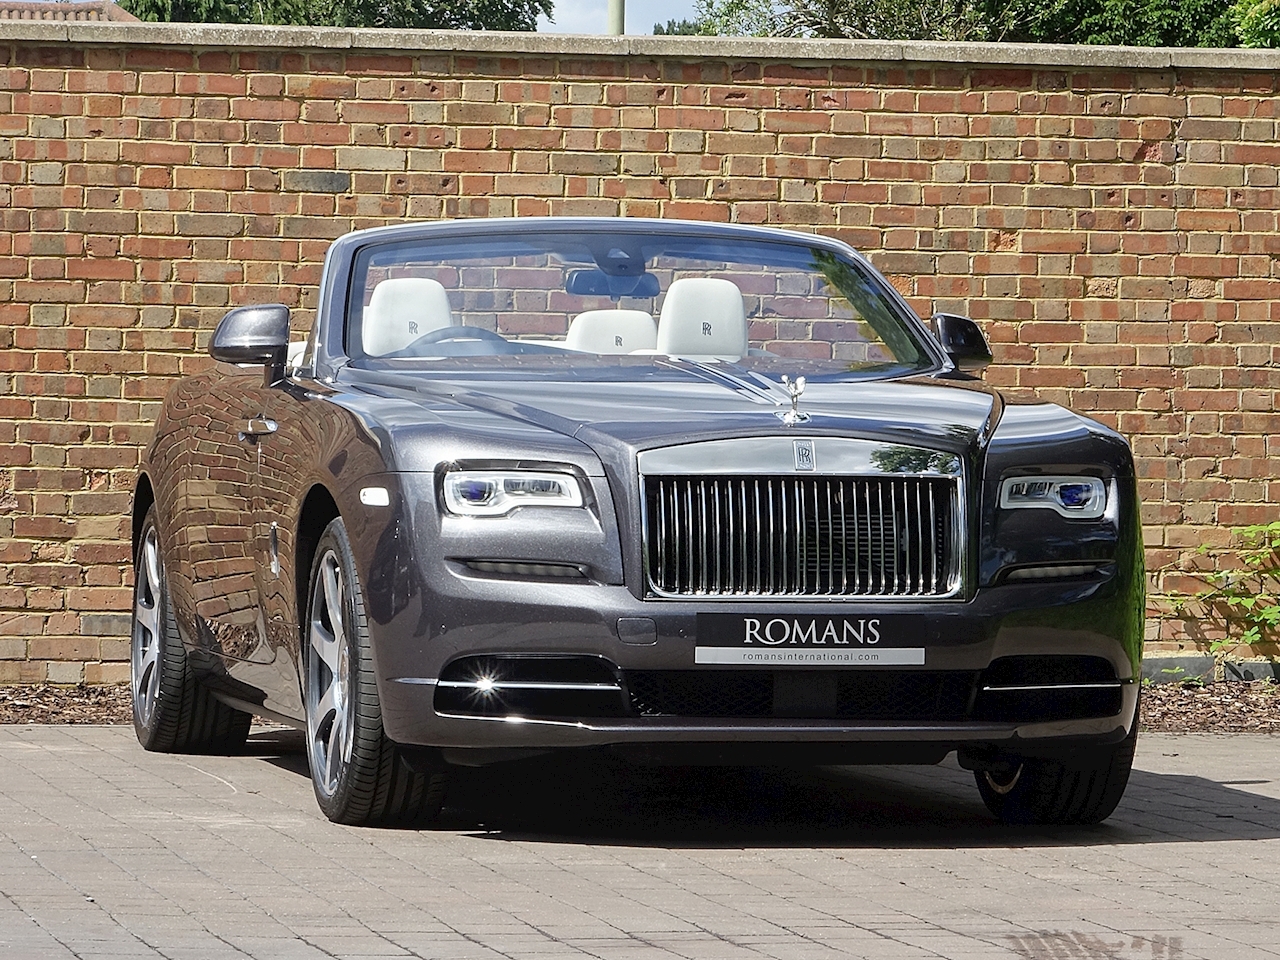 RollsRoyce Never Turns Up Its Nose At Social Media During COVID19